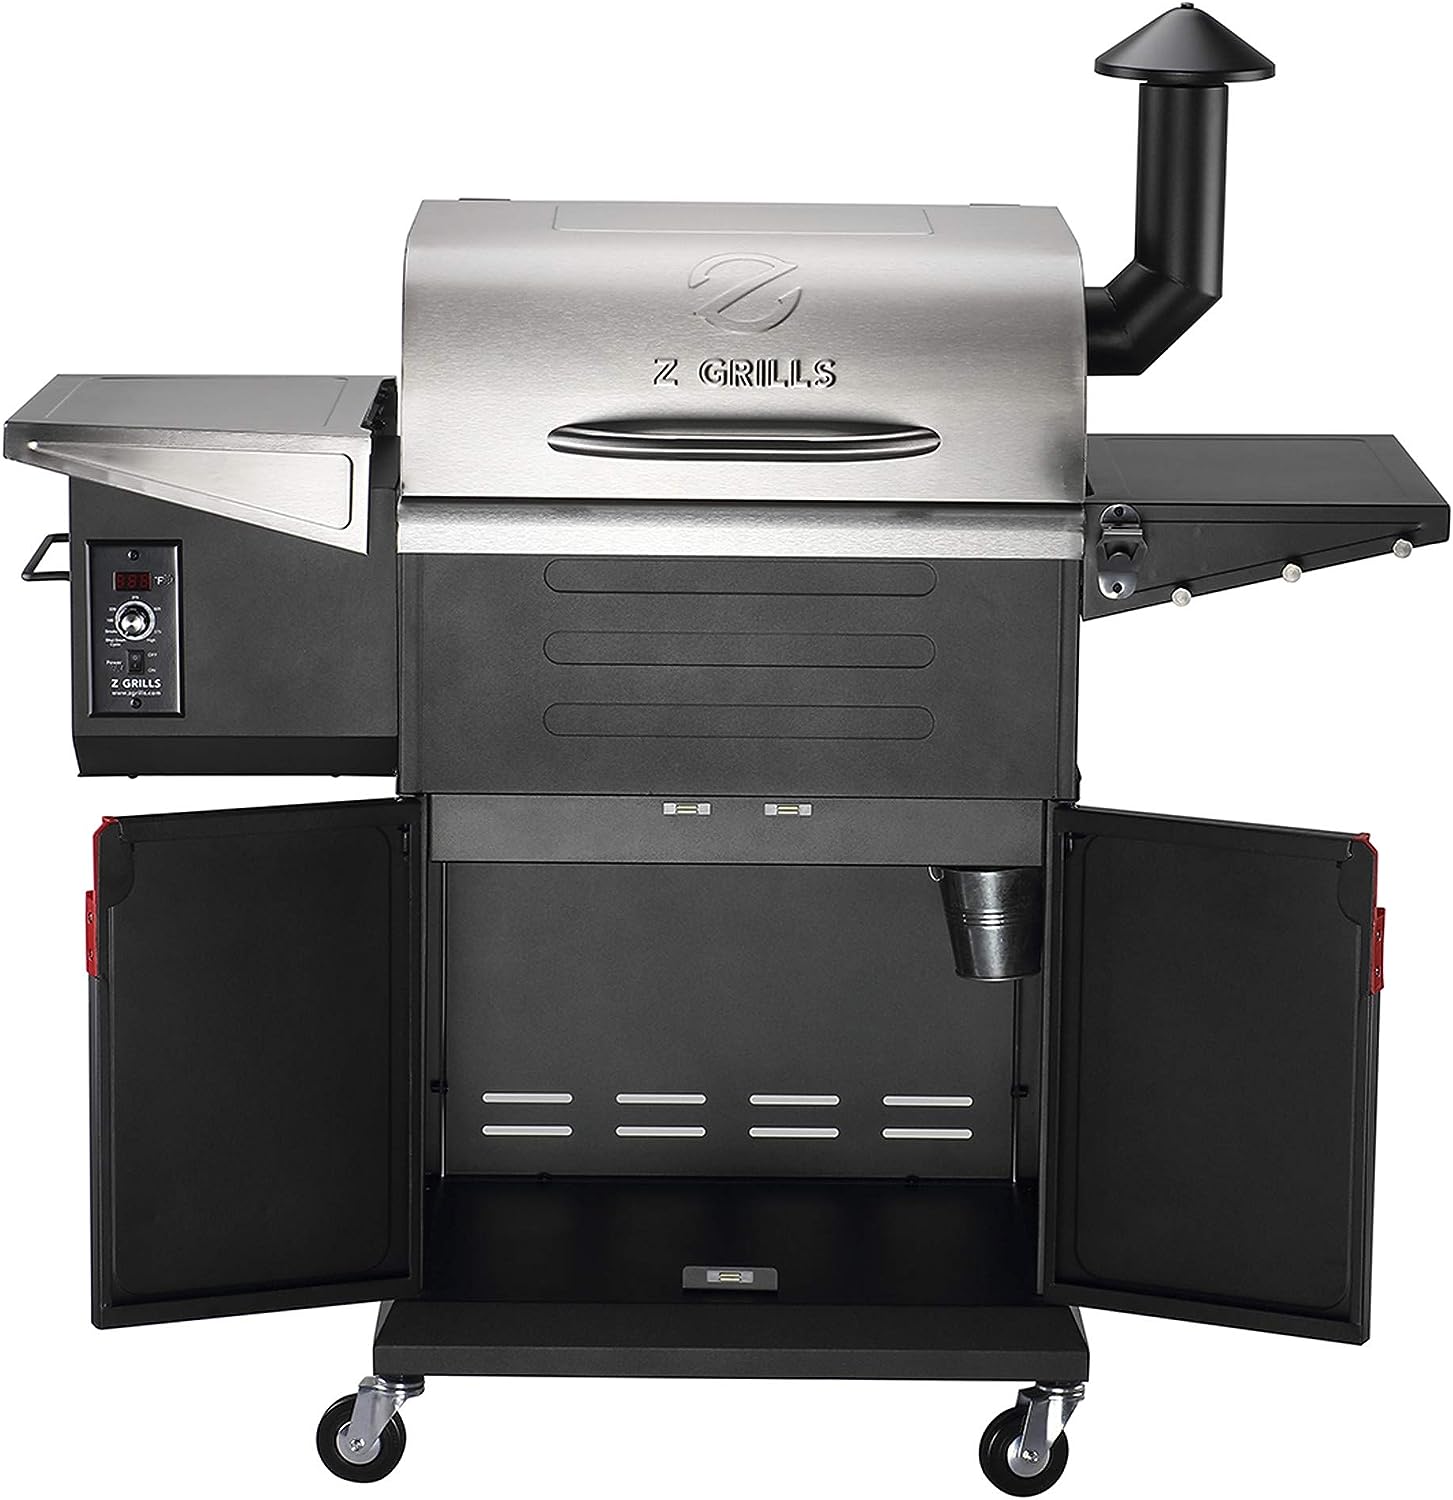 Z GRILLS Grill & Smoker 8 in 1 Grill 600D3E Wood Pellet Grill & Electric Smoker - $275